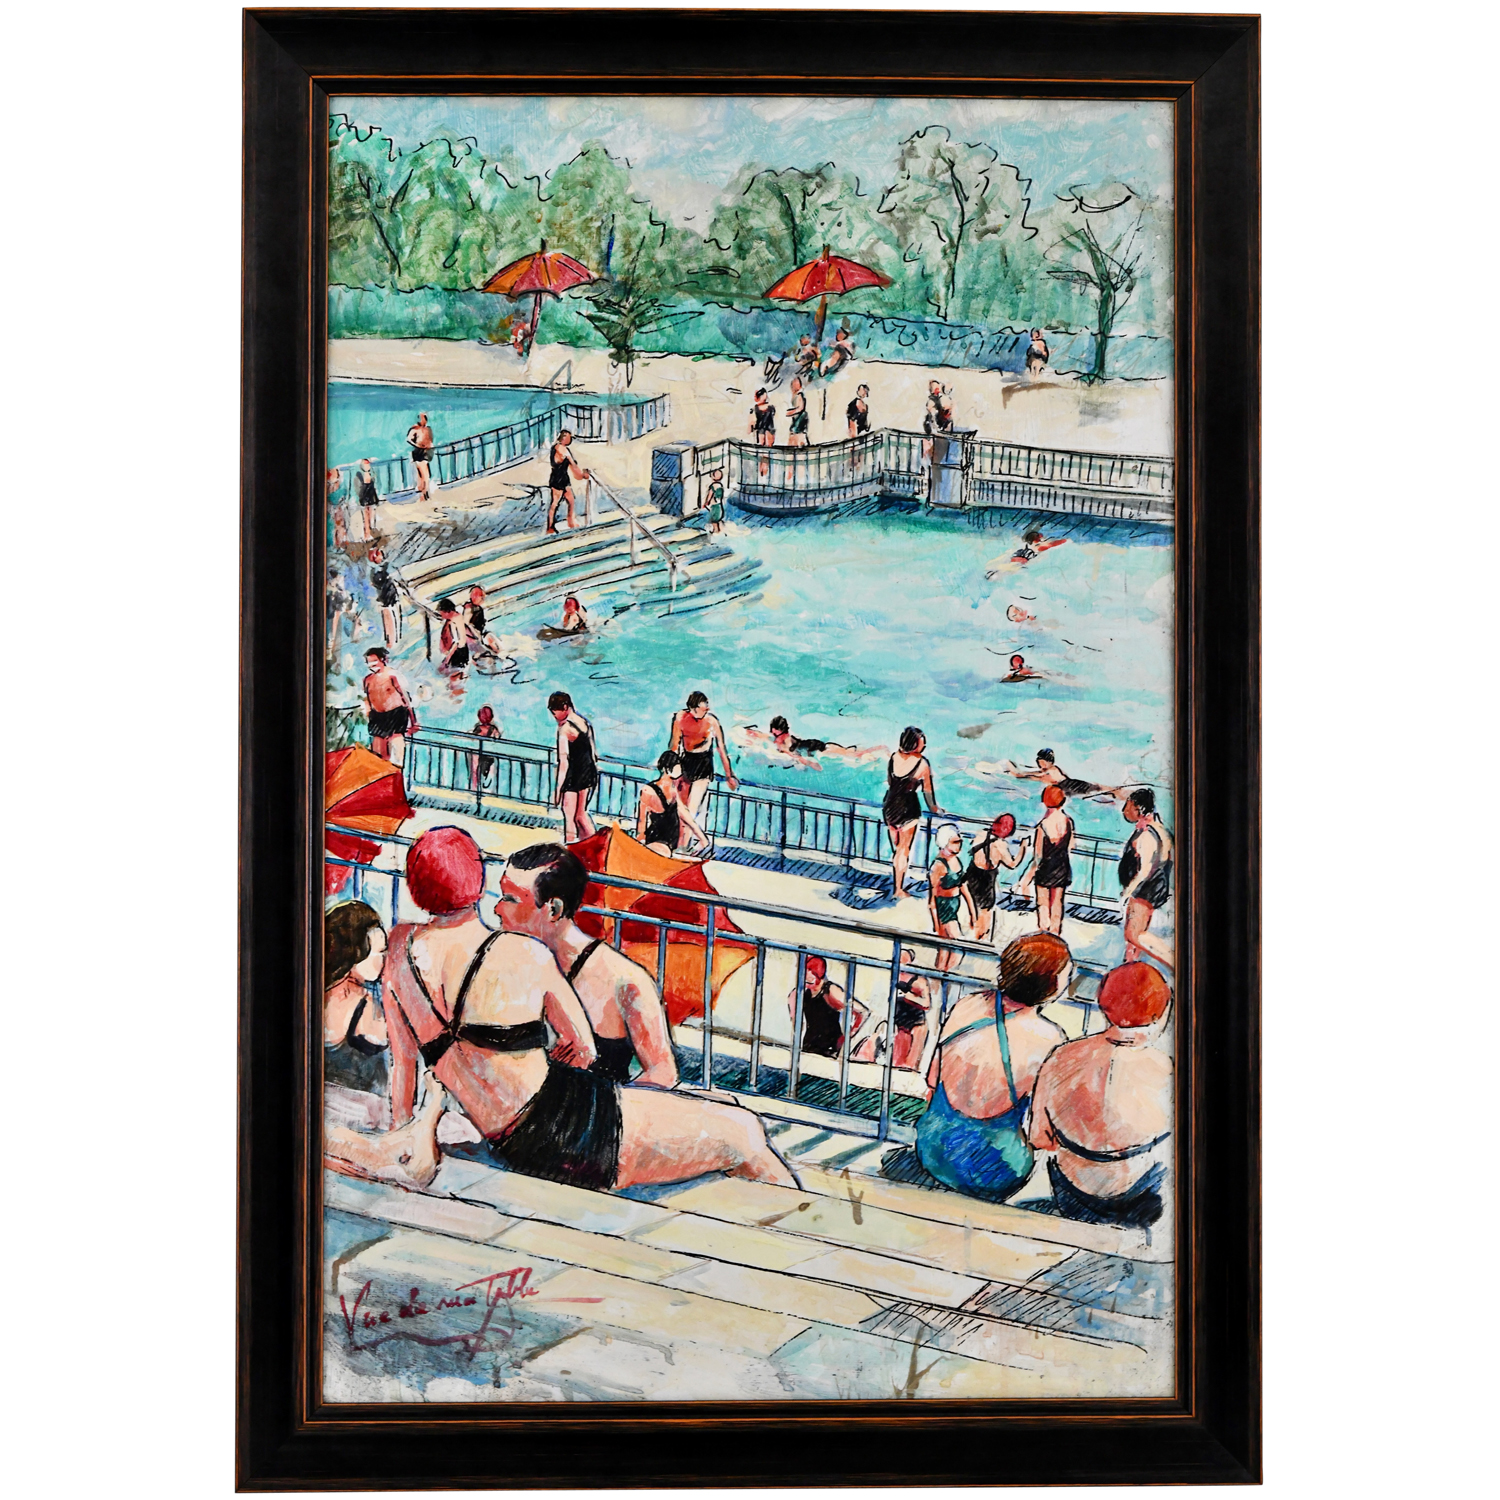 Christiane Caillotin painting swimming pool